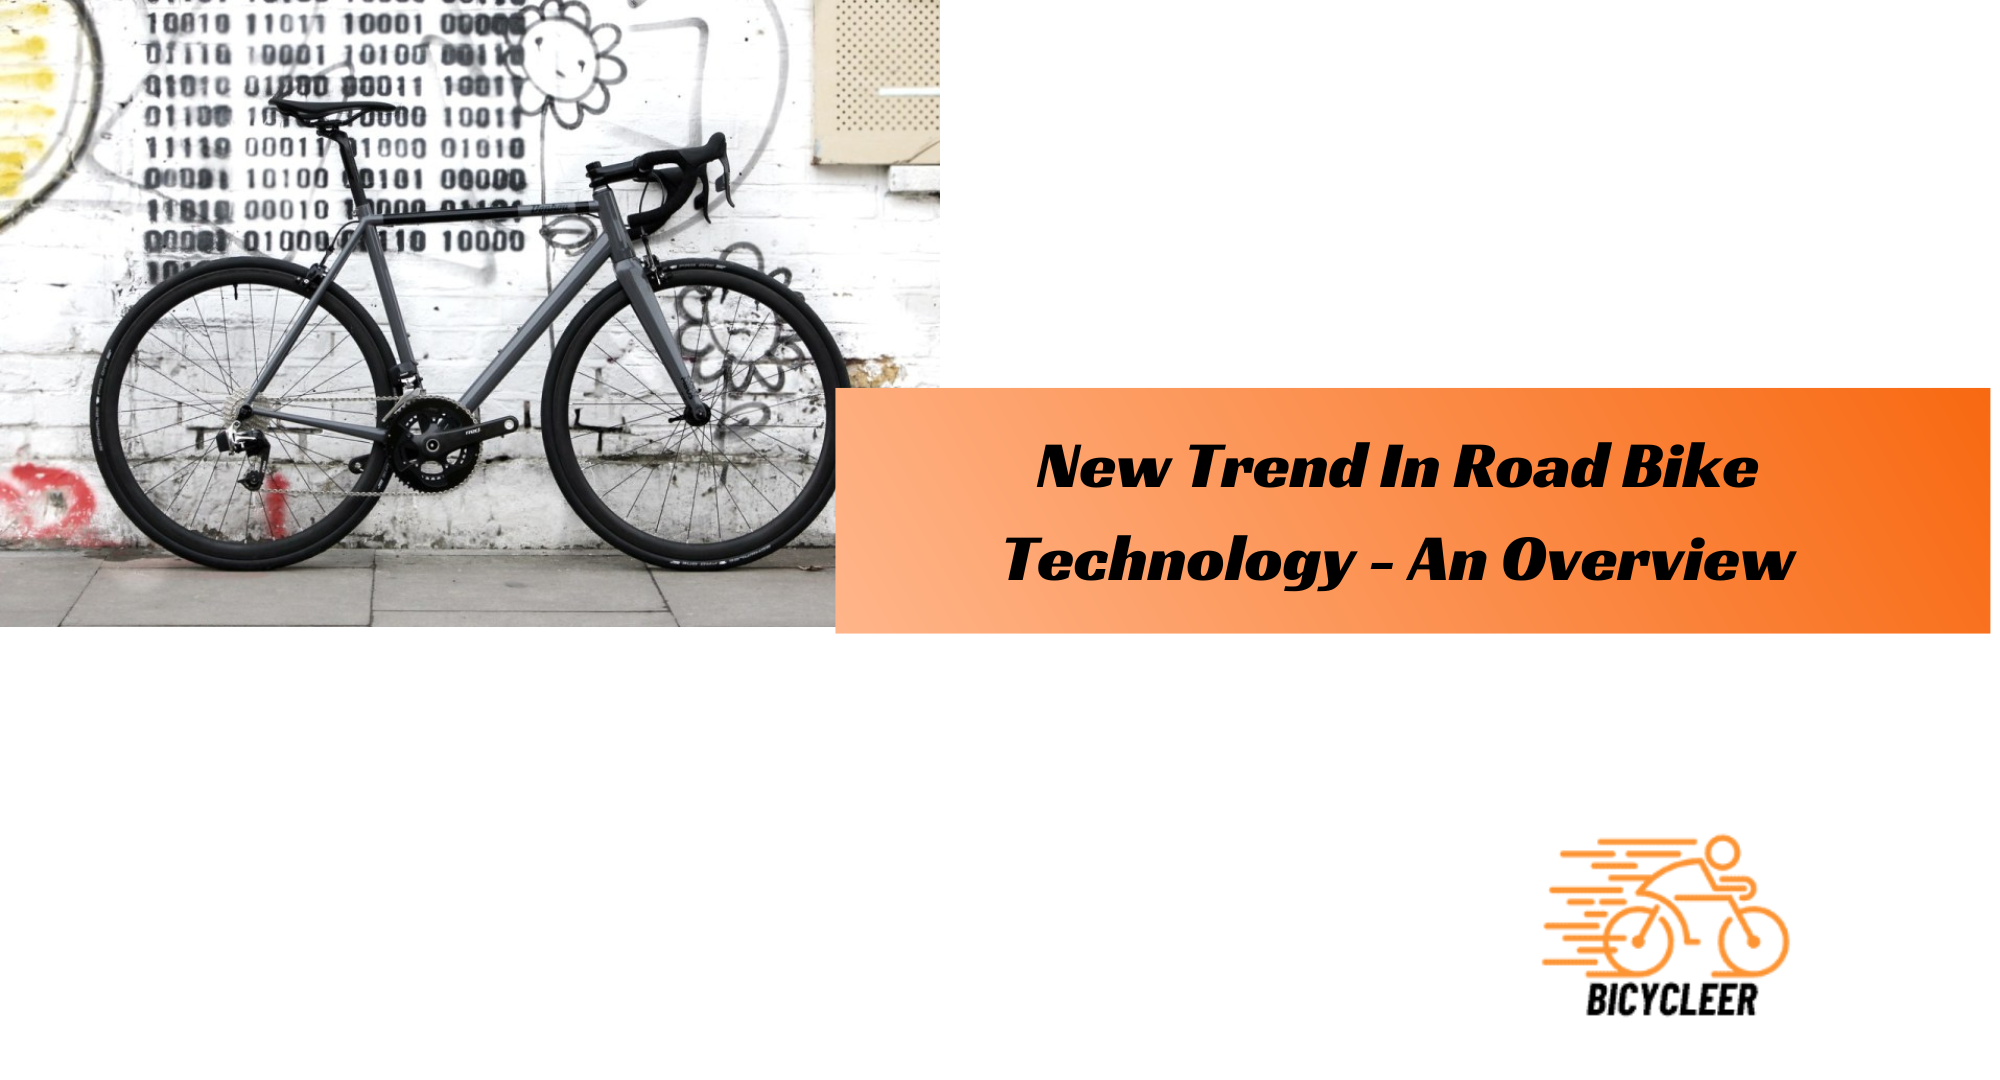 New Trend In Road Bike Technology - An Overview